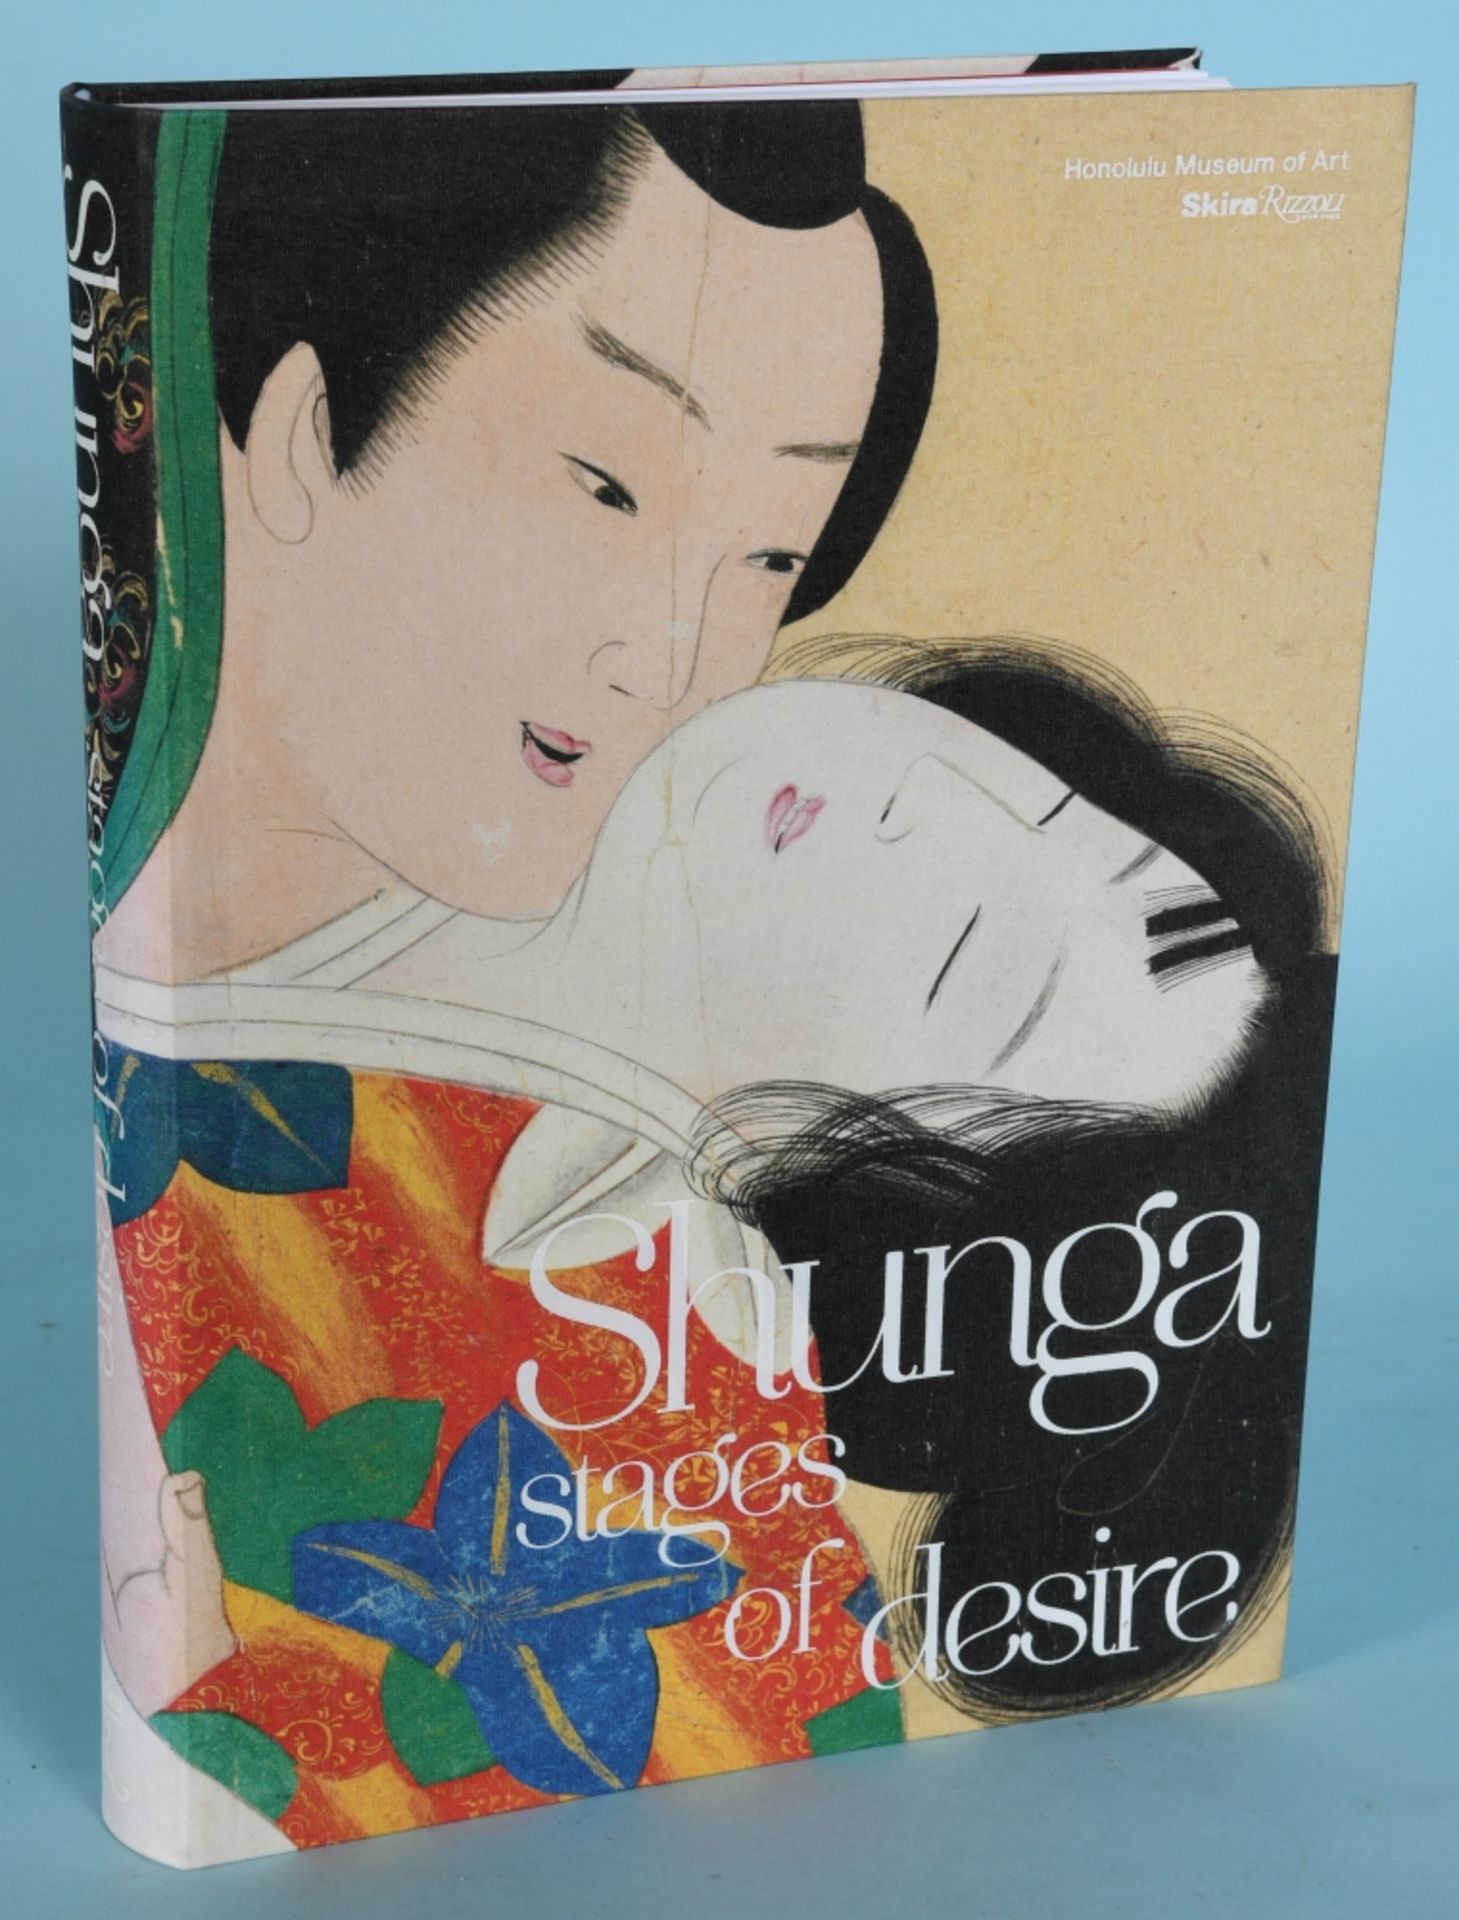 Jost, Stephan, u.a. "Shunga - stages of desire"